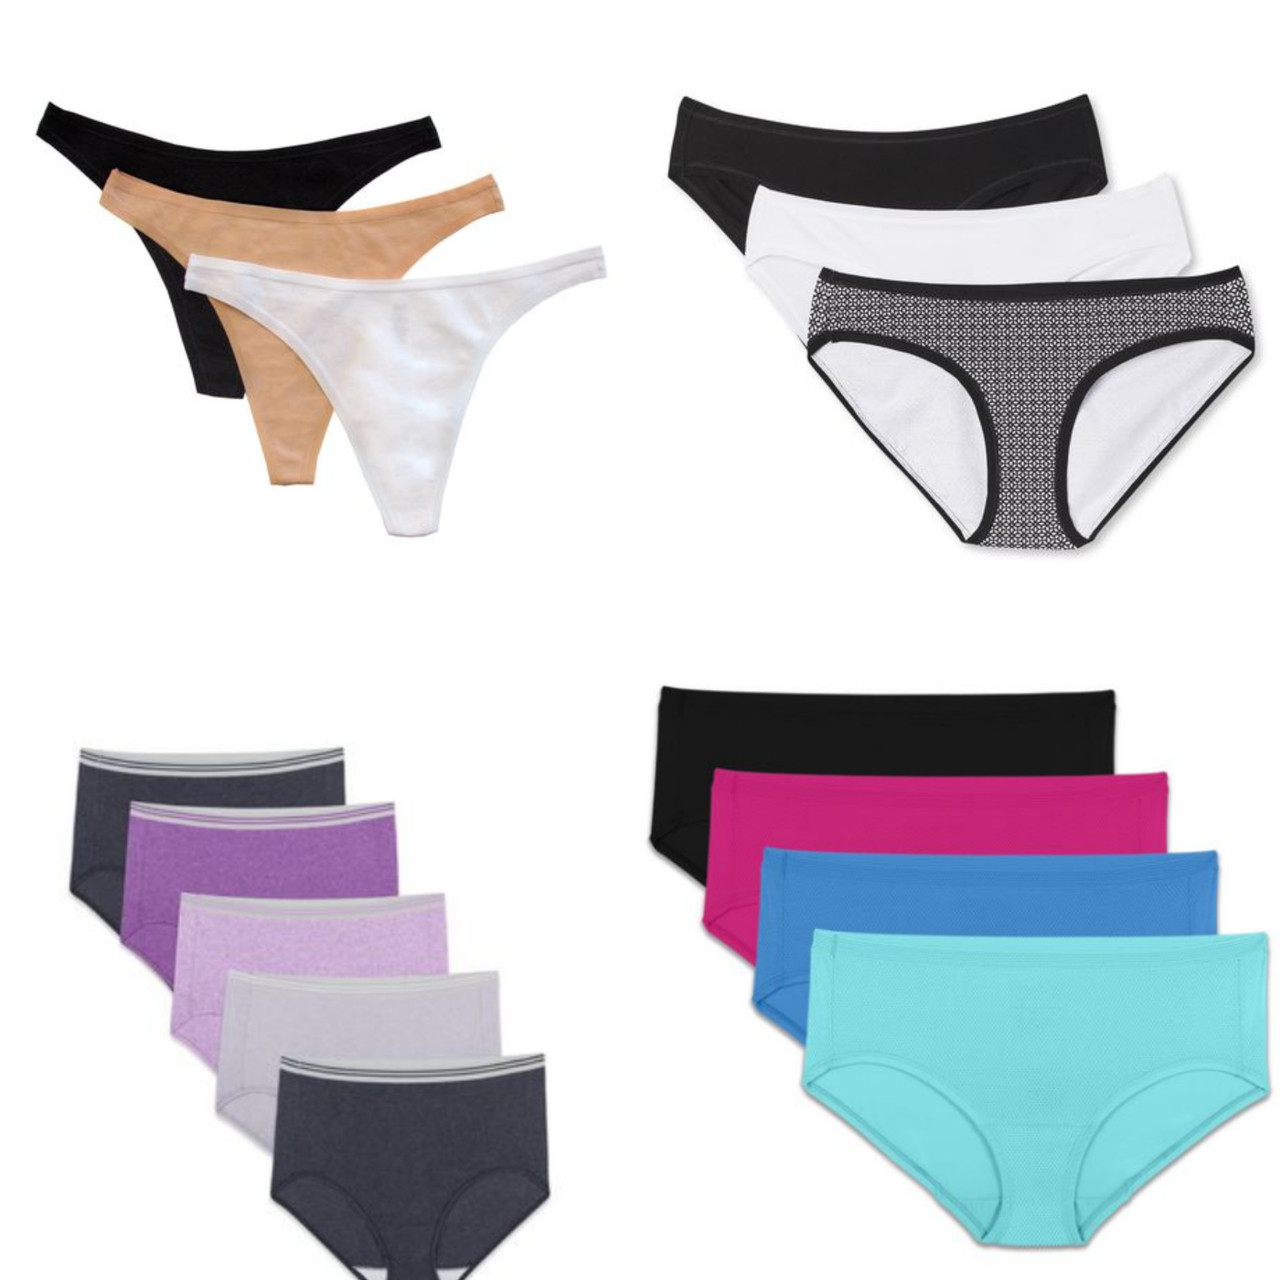 Fruit of the Loom Fit for Me Women's Breathable Mesh Brief, 4-Pack 